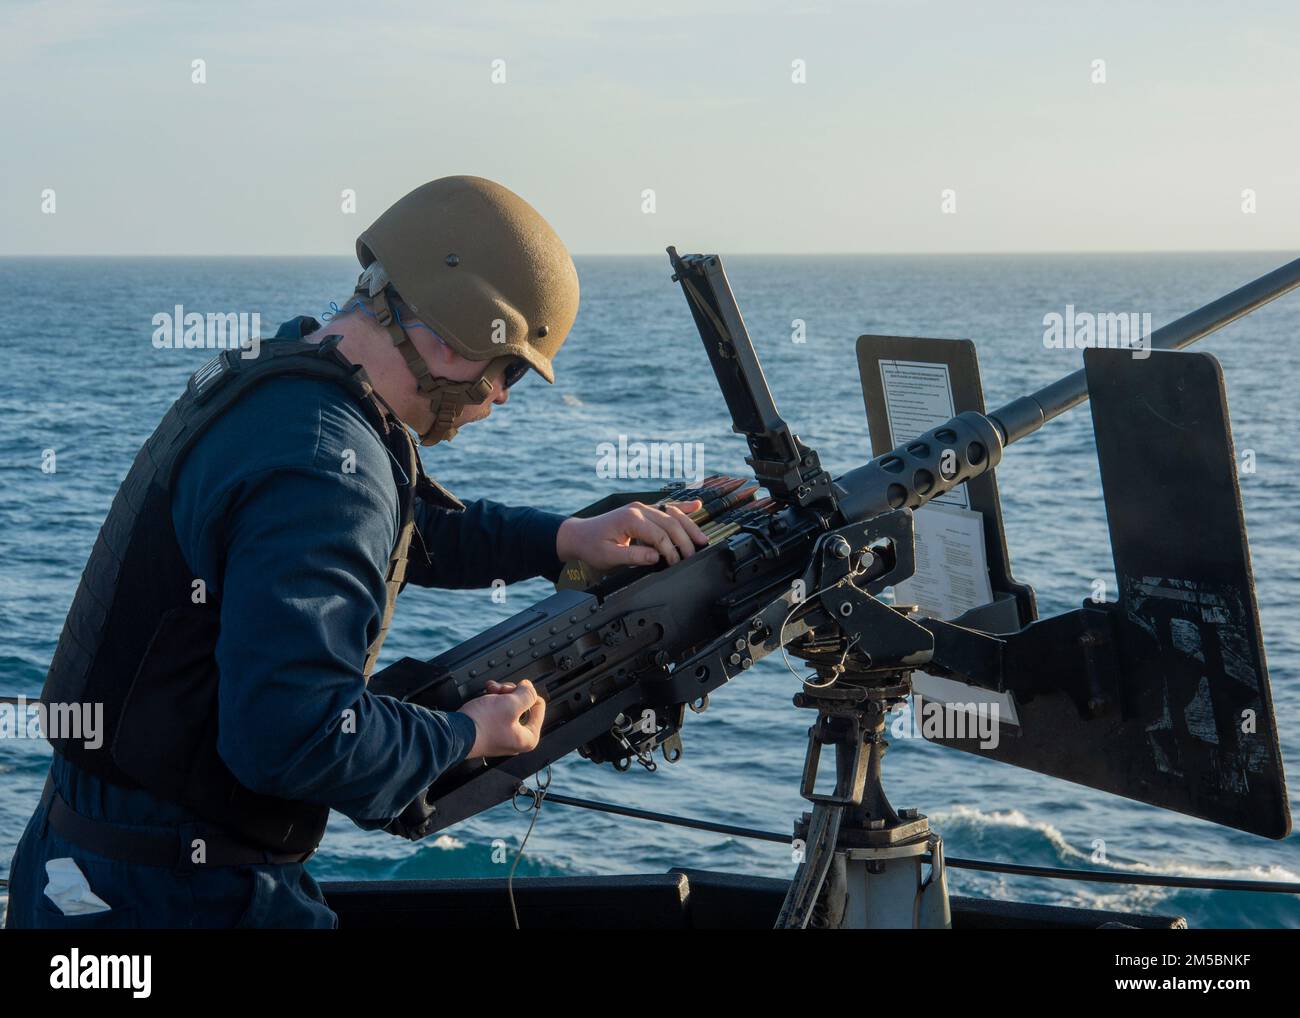 ATLANTIC OCEAN - Feb. 23, 2022 - Fire Controlman 2nd Class Devon Monroe performs a pre-fire check on a .50-caliber machine gun as part of the Surface Warfare Advanced Tactical Training (SWATT) exercise aboard the guided-missile destroyer USS Truxtun (DDG 103). Truxtun is part of Destroyer Squadron (DESRON) 26 which supports Carrier Strike Group (CSG) 10. SWATT is led by the Naval Surface and Mine Warfighting Development Center (SMWDC) and is designed to increase warfighting proficiency, lethality and interoperability of participating units. Stock Photo